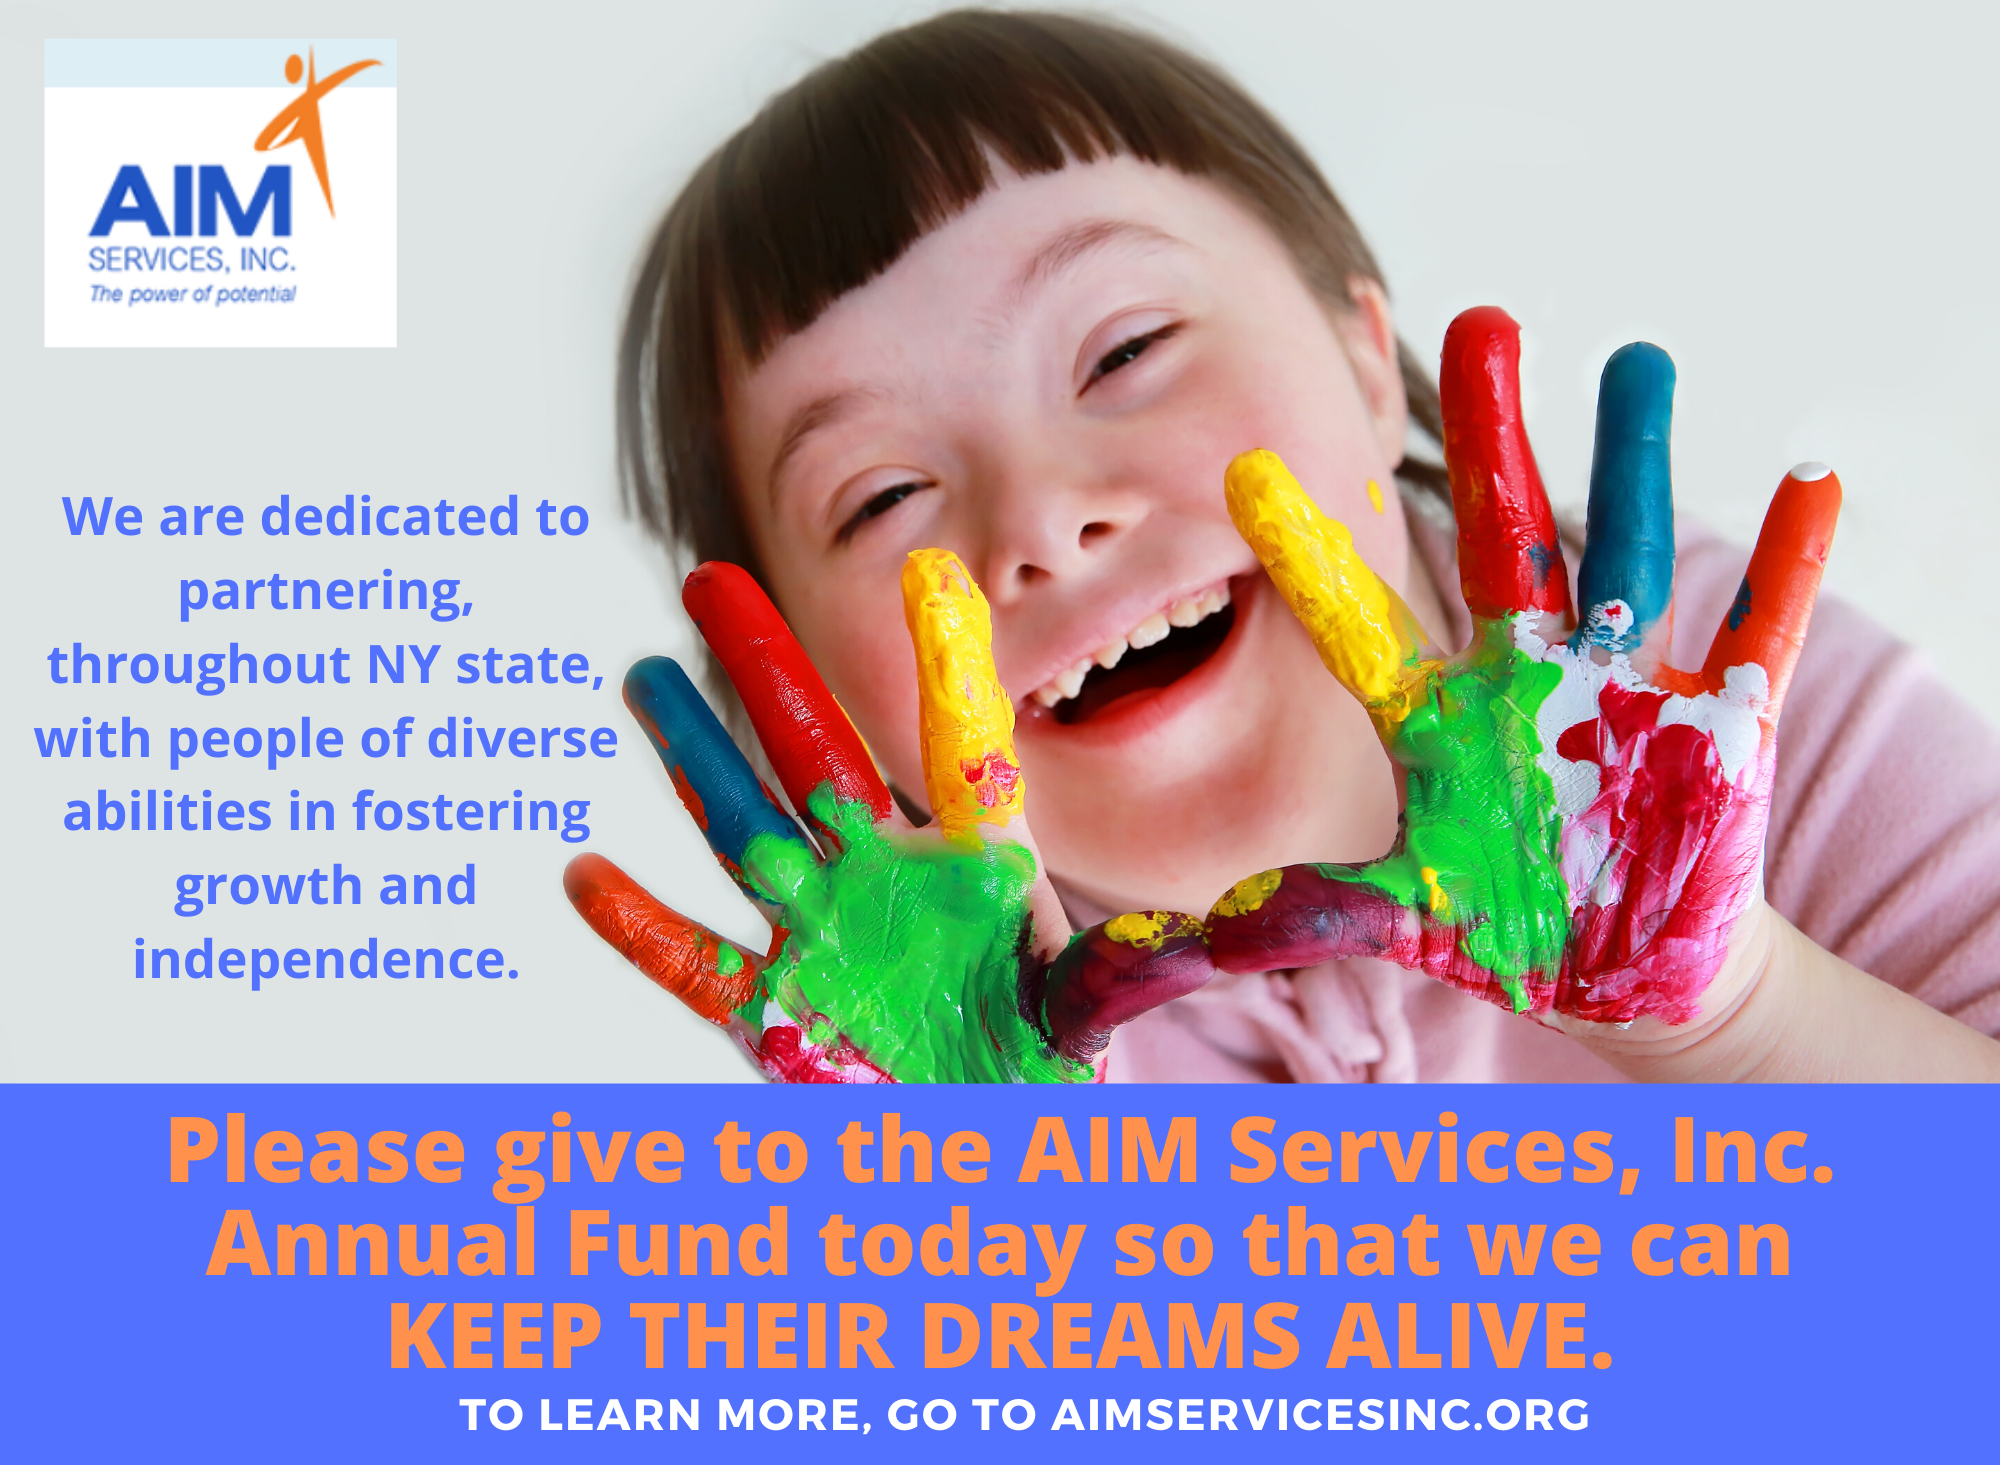 AIM Service, Inc is in an annual fund drive. They care for the most vulnerable in our community.